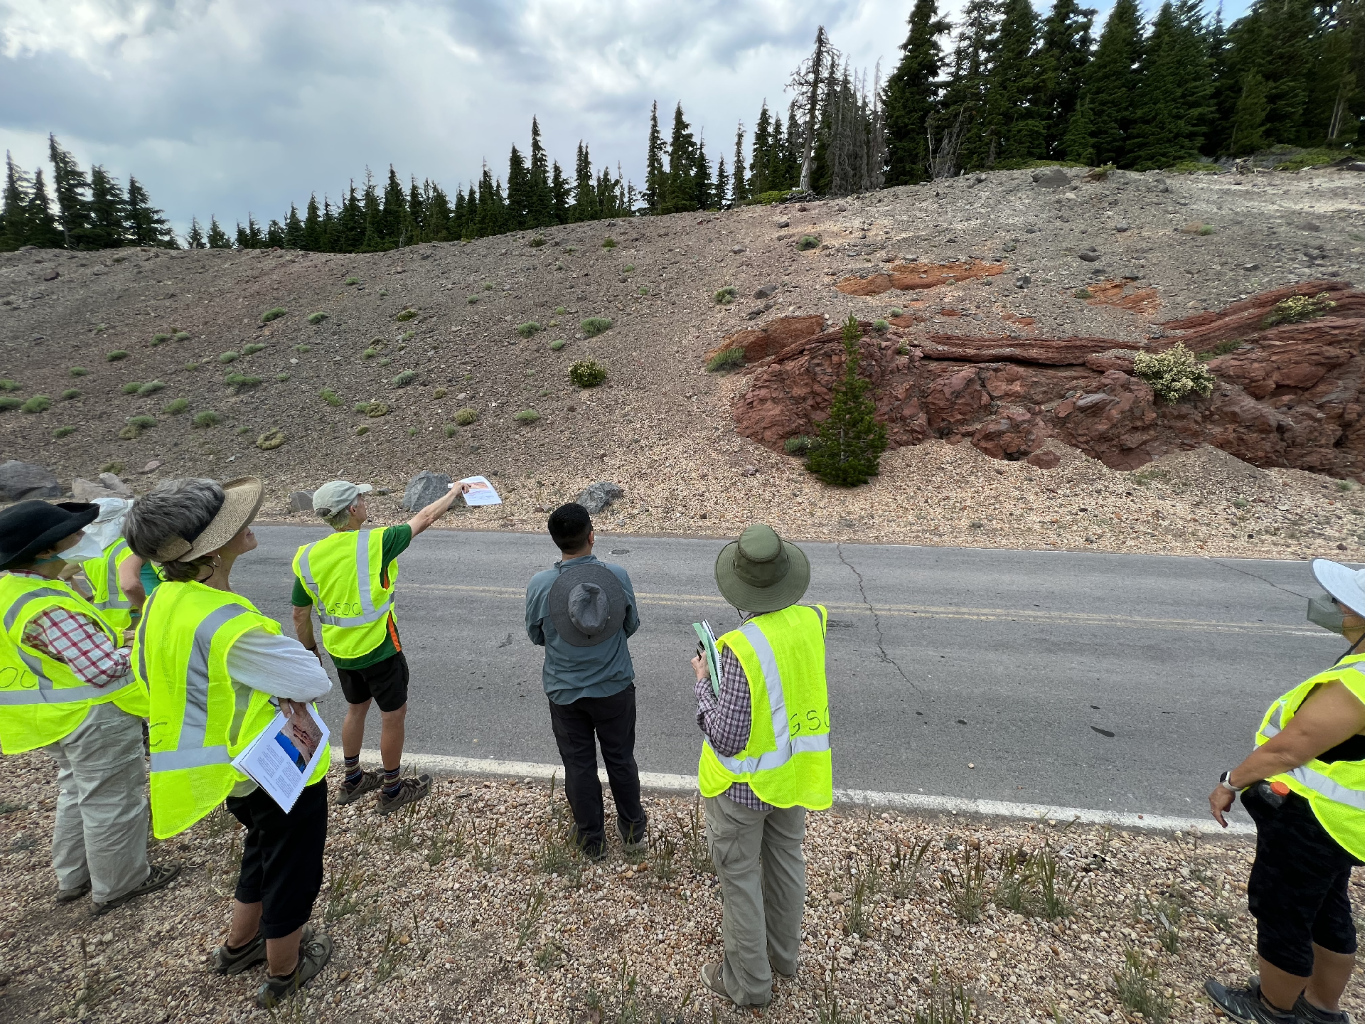  Lee discusses the pumice outcrop. 